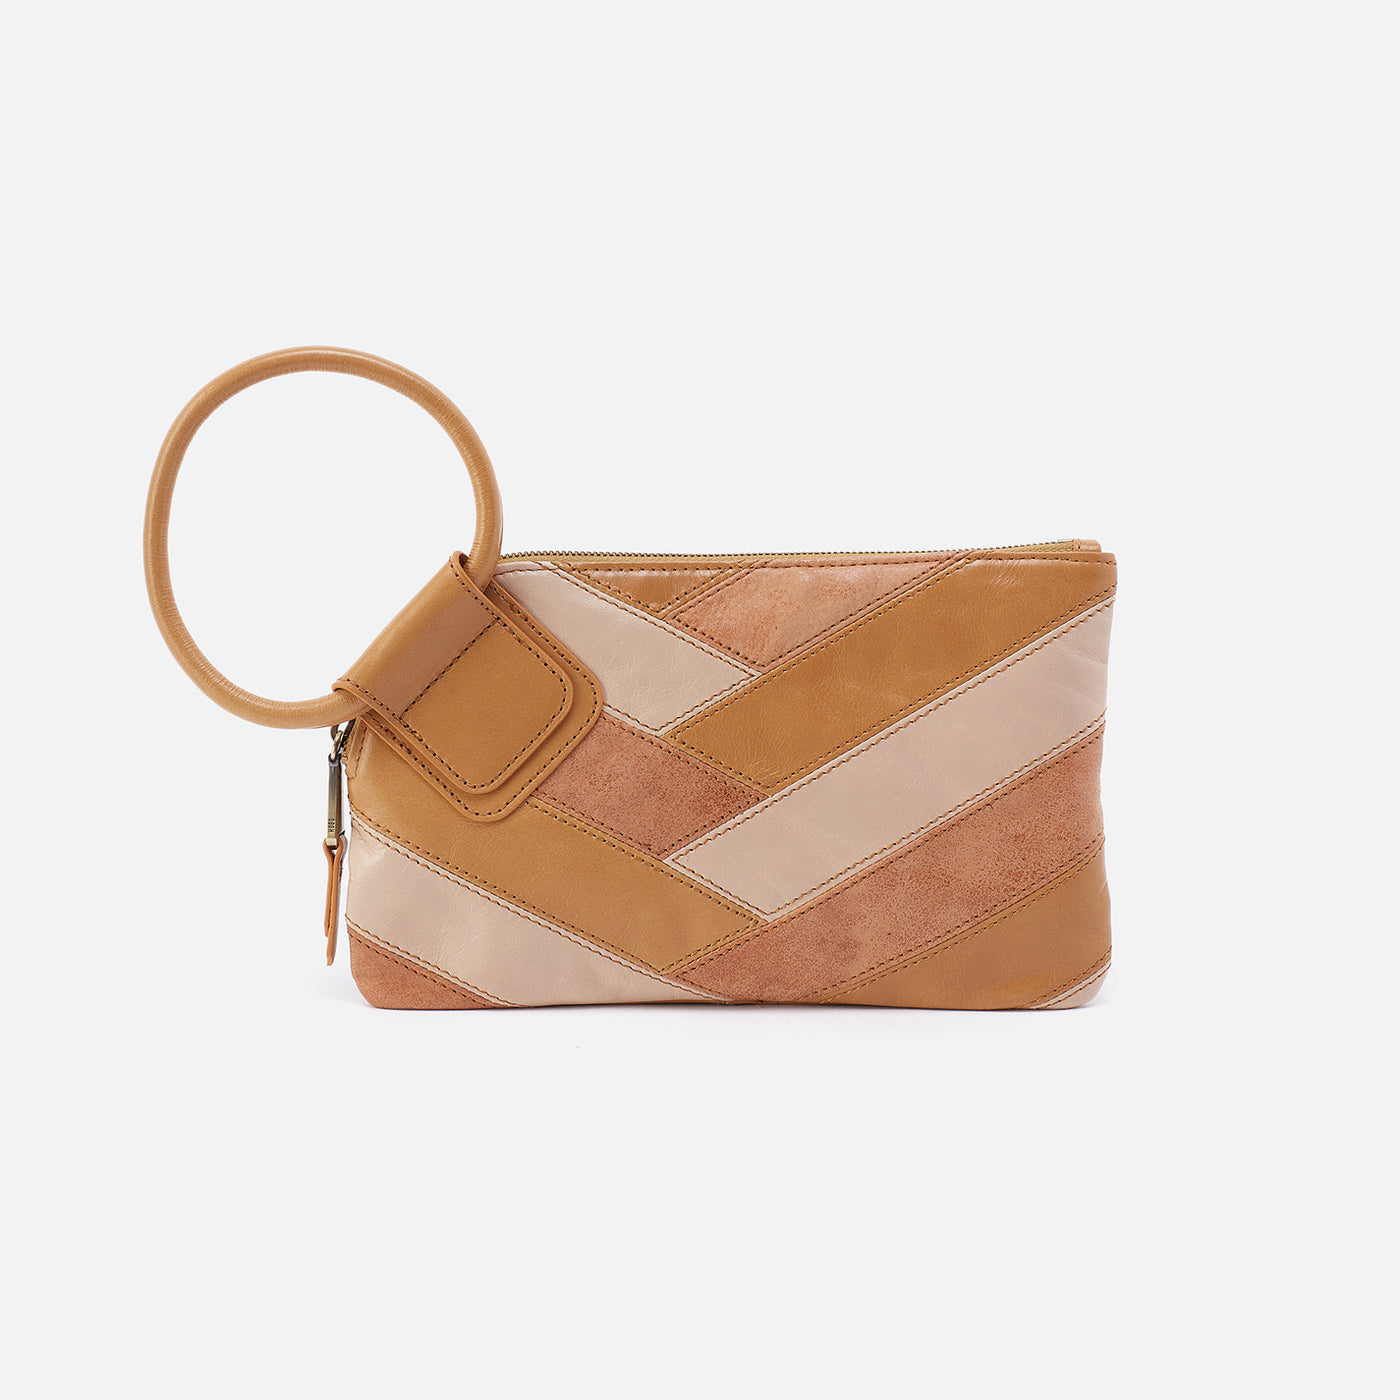 Sable Wristlet in Patchwork Leather - Multi